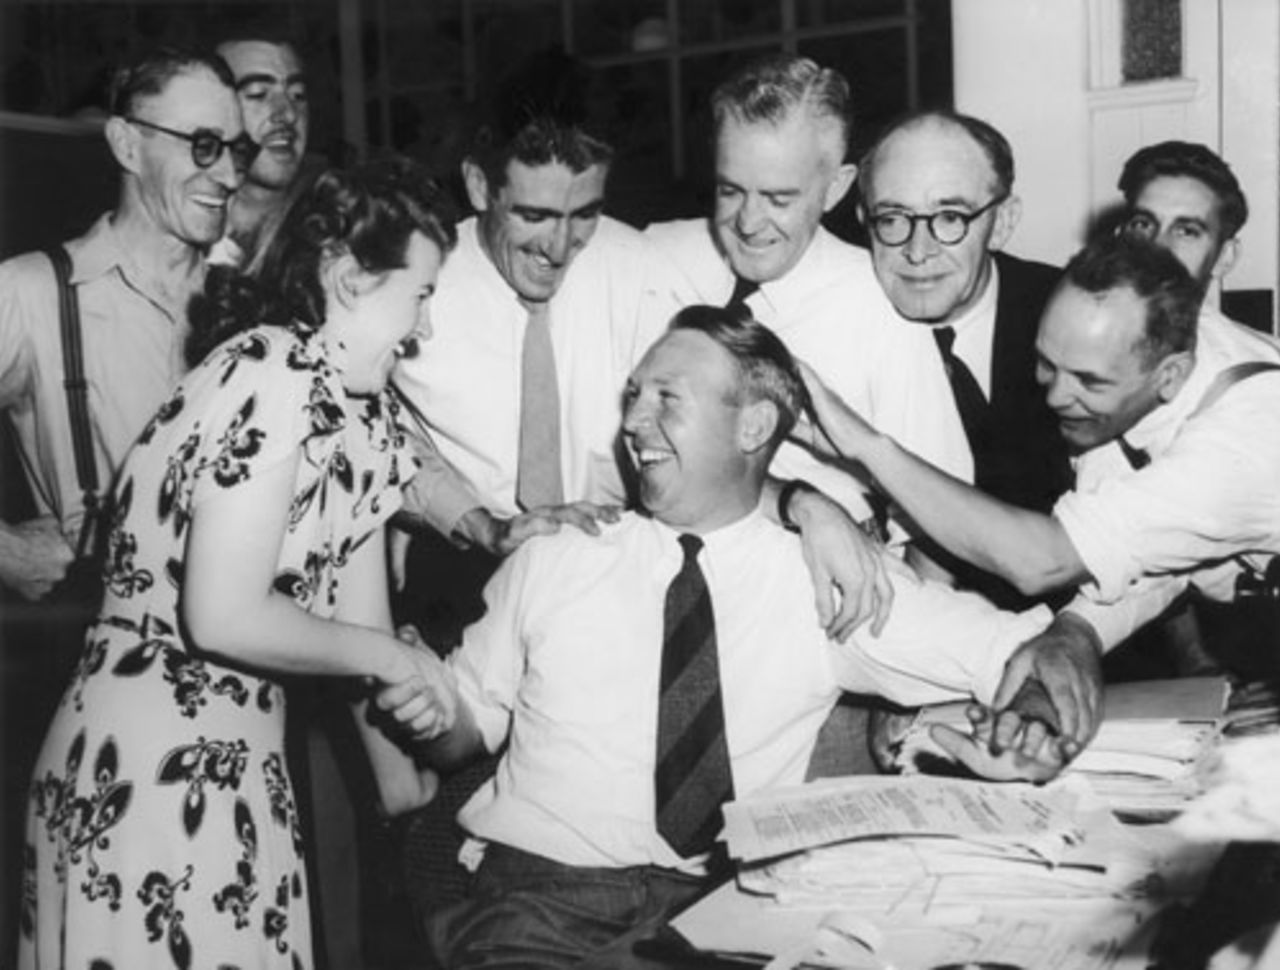 Doug Ring is congratulated by his colleagues at the Melbourne Department of Commerce for being picked in the Australian squad for the tour to England, February 25, 1948